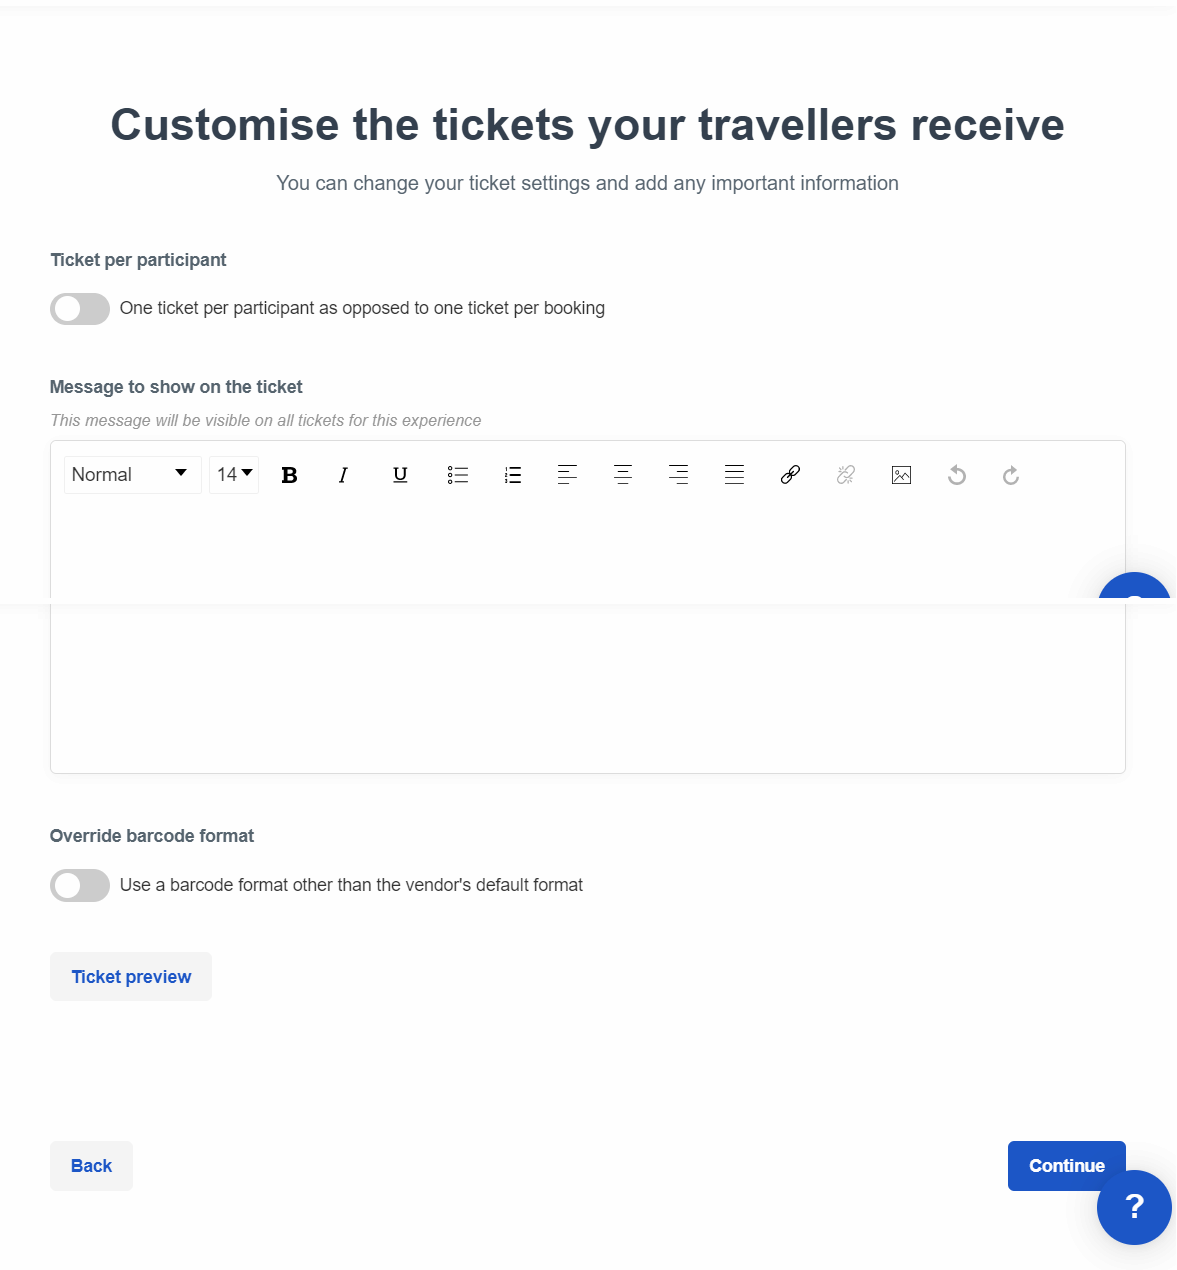 The ticket page with all settings visible